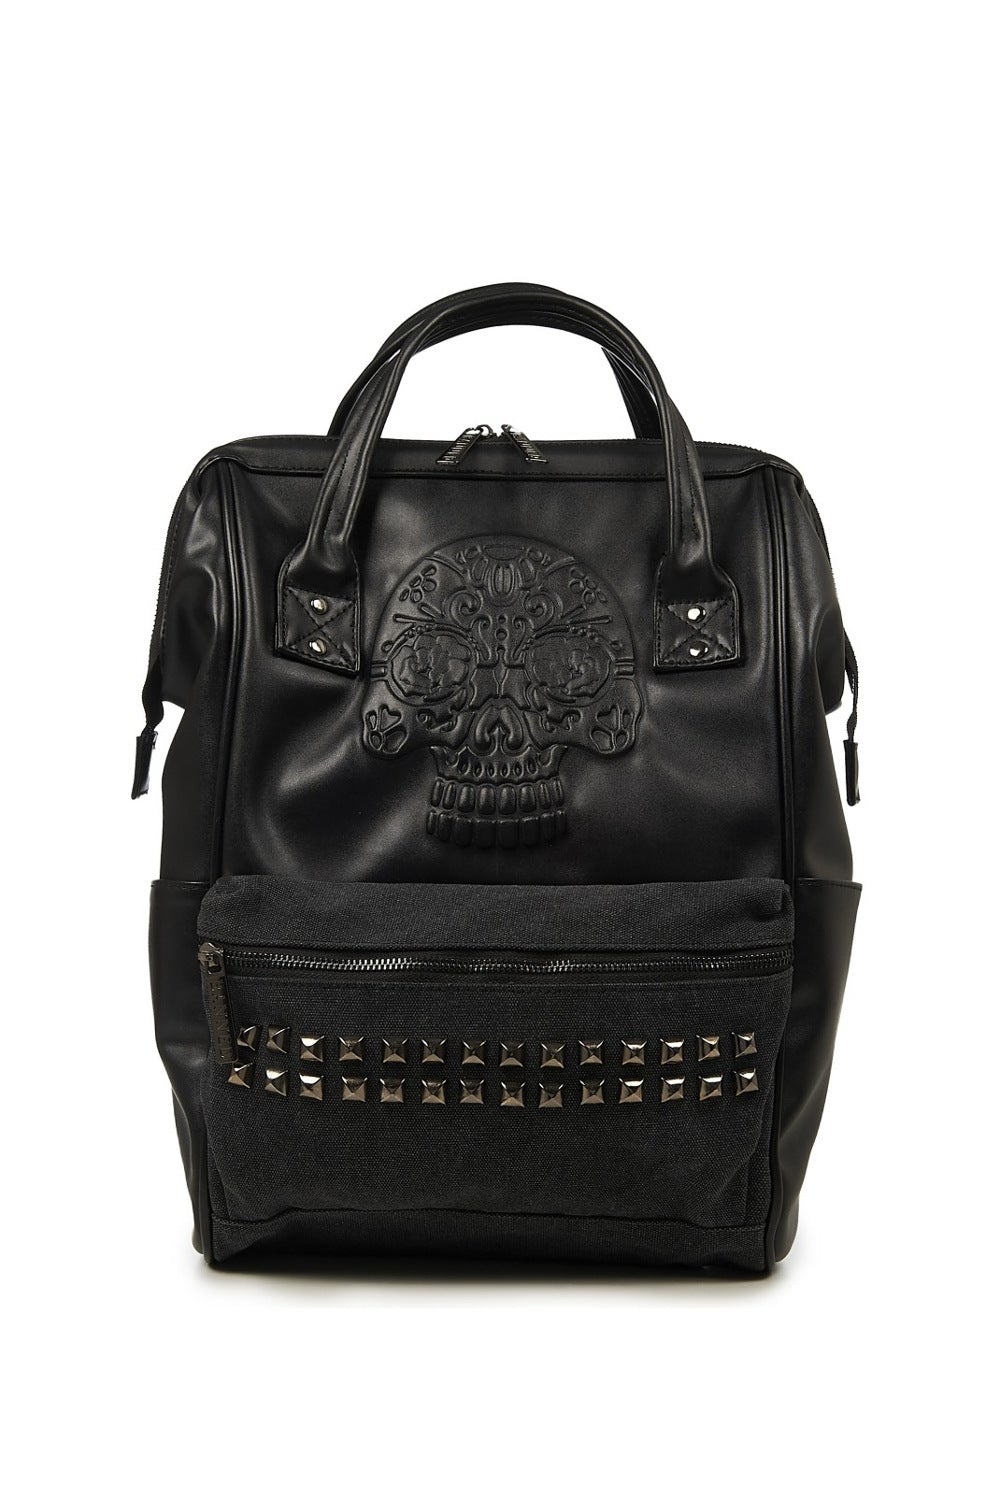 Black backpack with studs on front pocket and embossed skull detail above